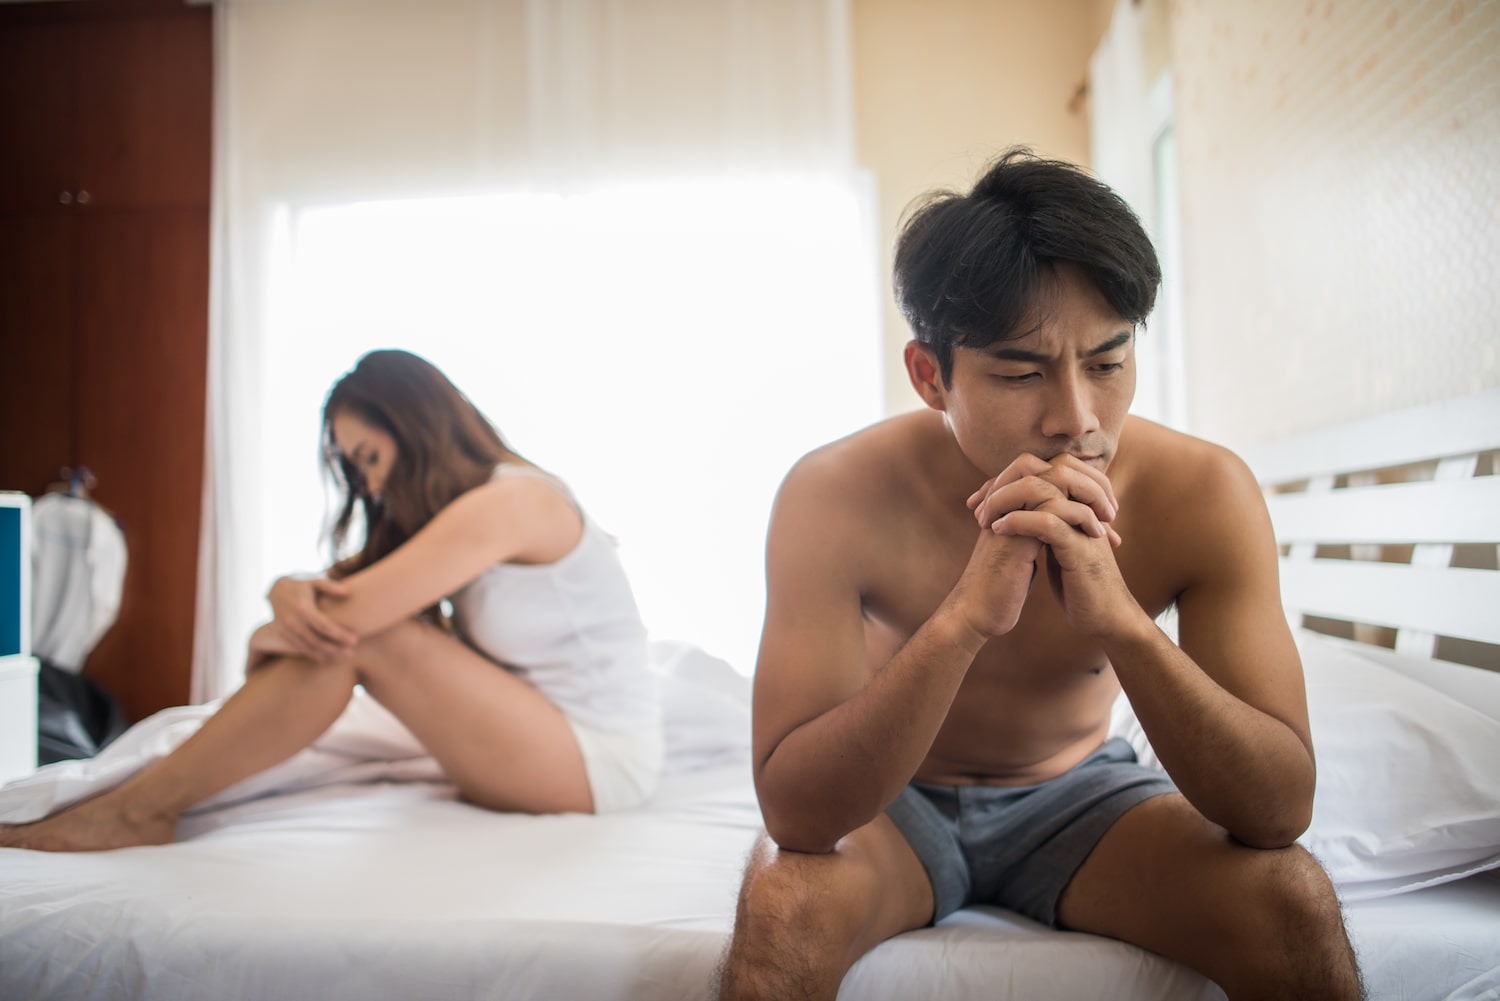 jelqing causes erectile dysfunction